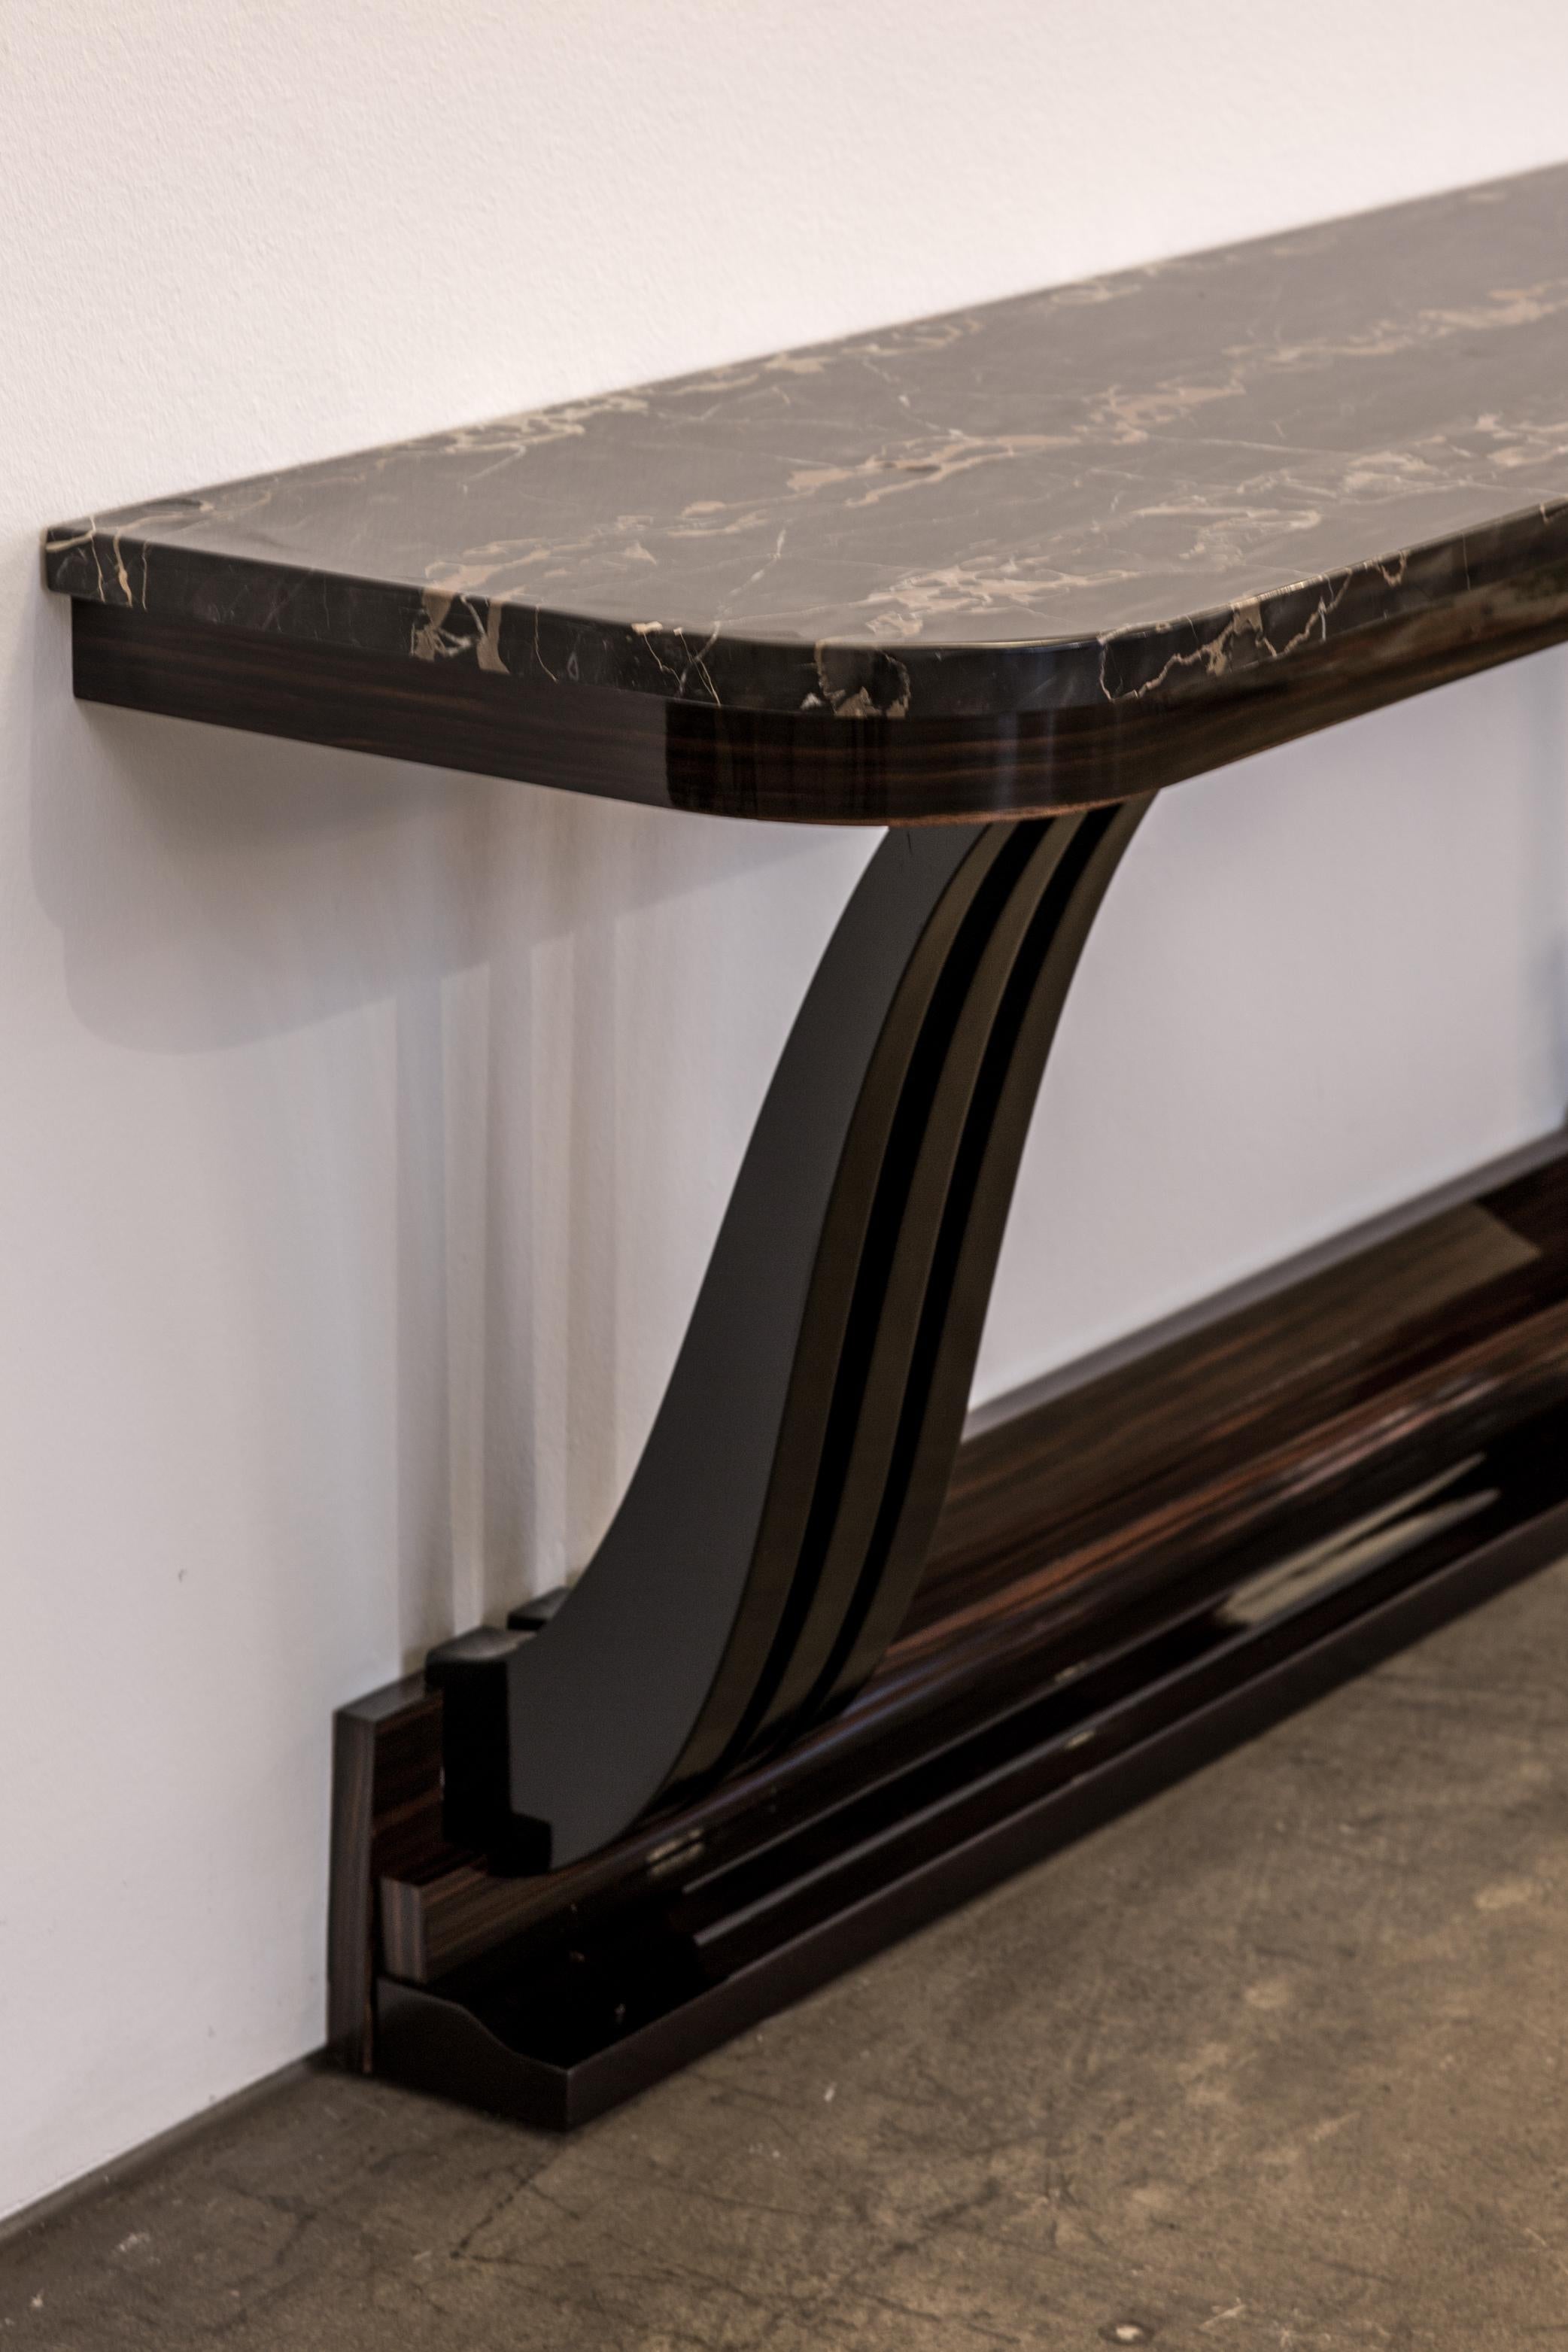 Antique French Art Deco Console Table with Original Marble Top from 1930 For Sale 1